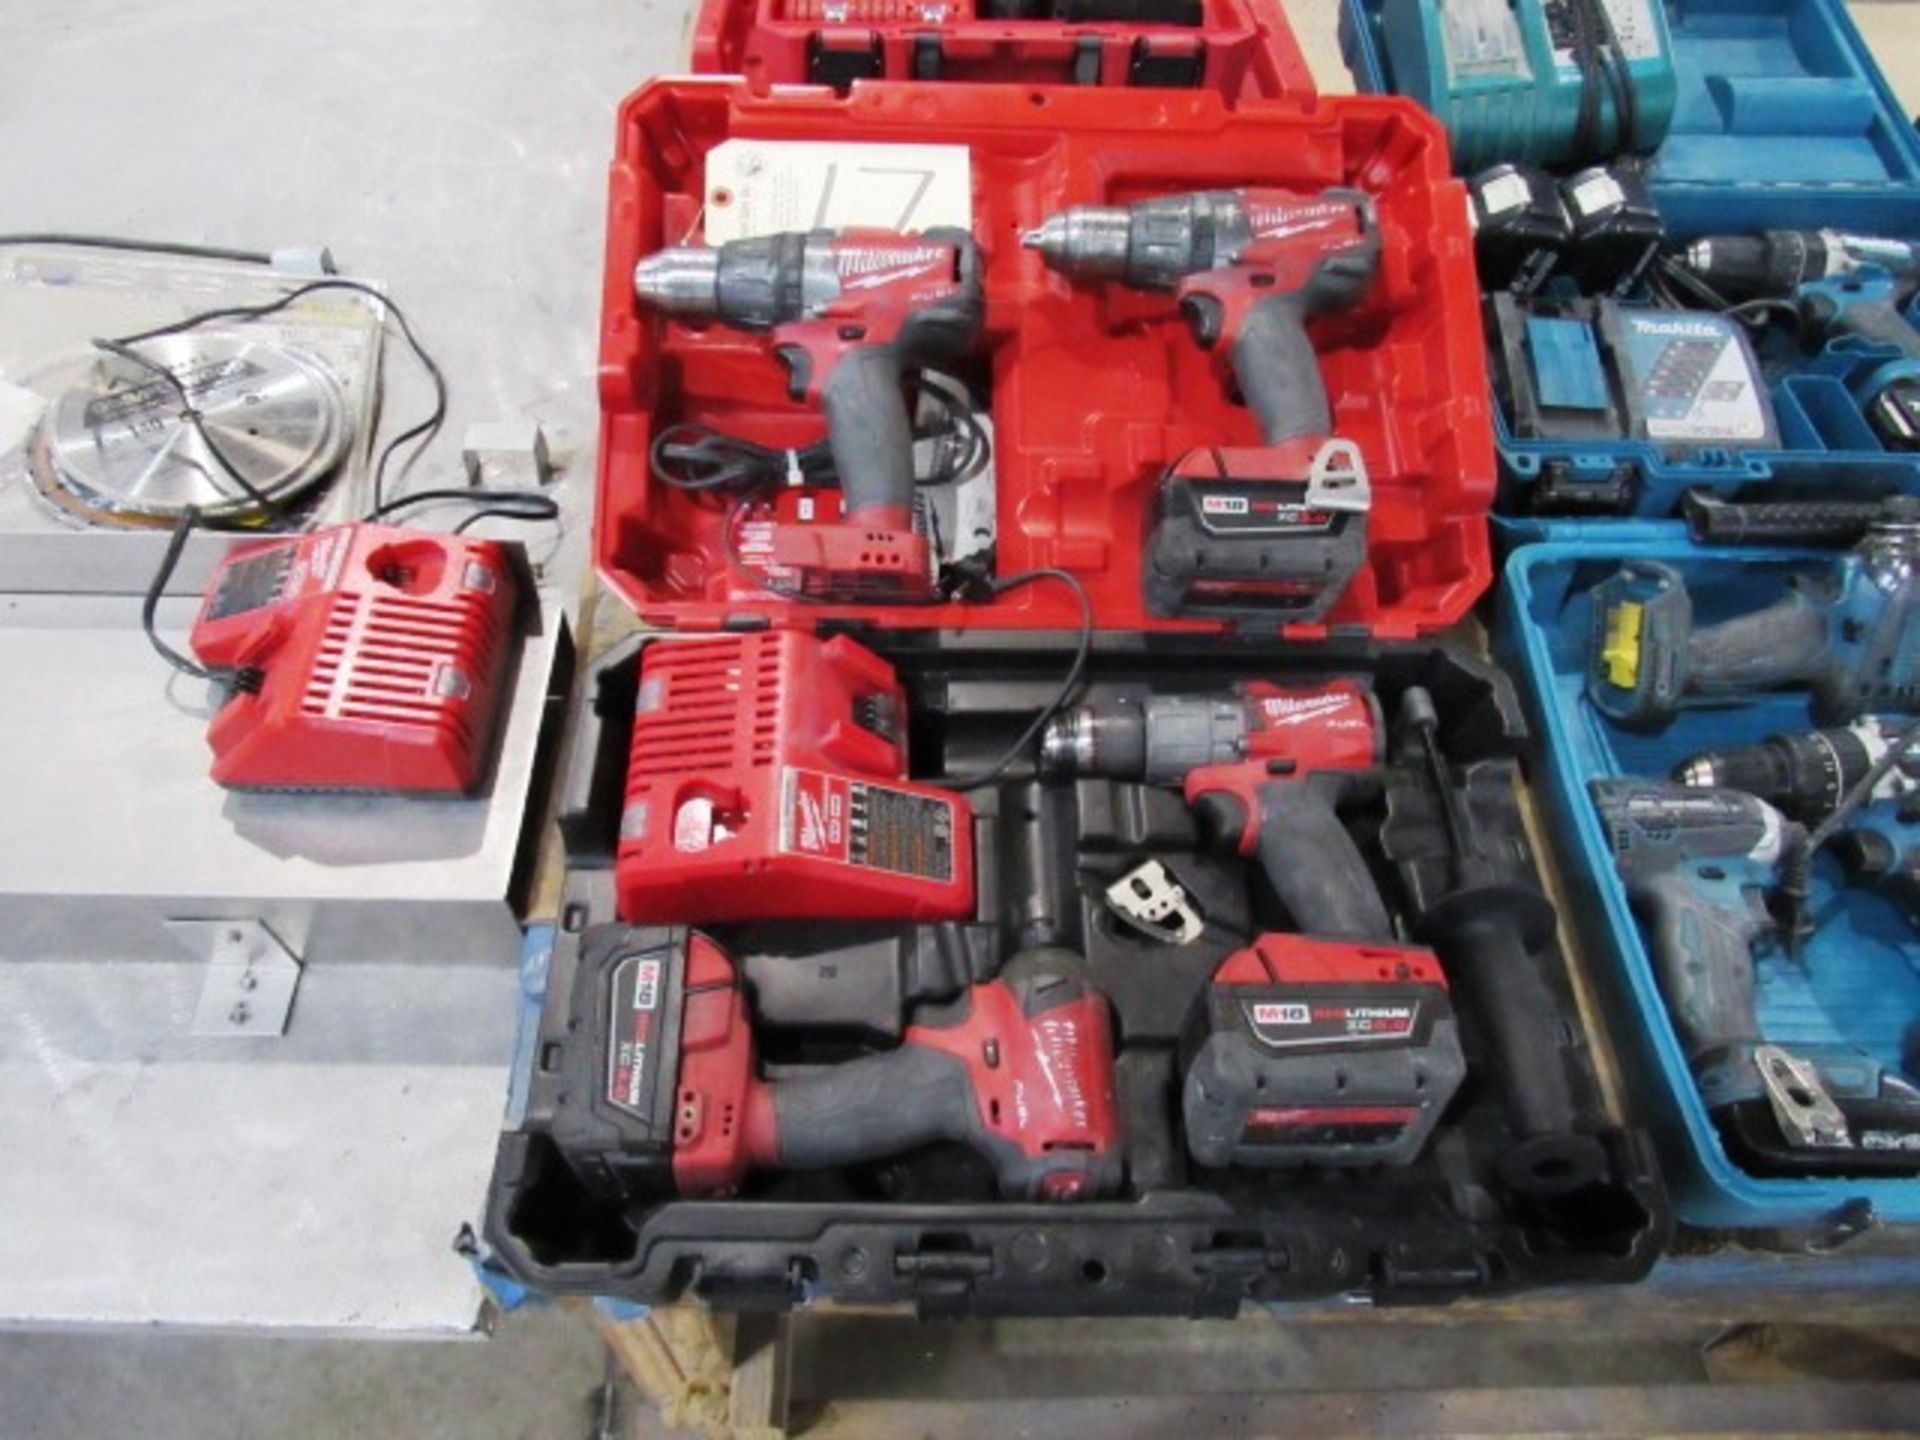 (3) Milwaukee Drills, (1) Driver, (3) Batteries, (2) Chargers